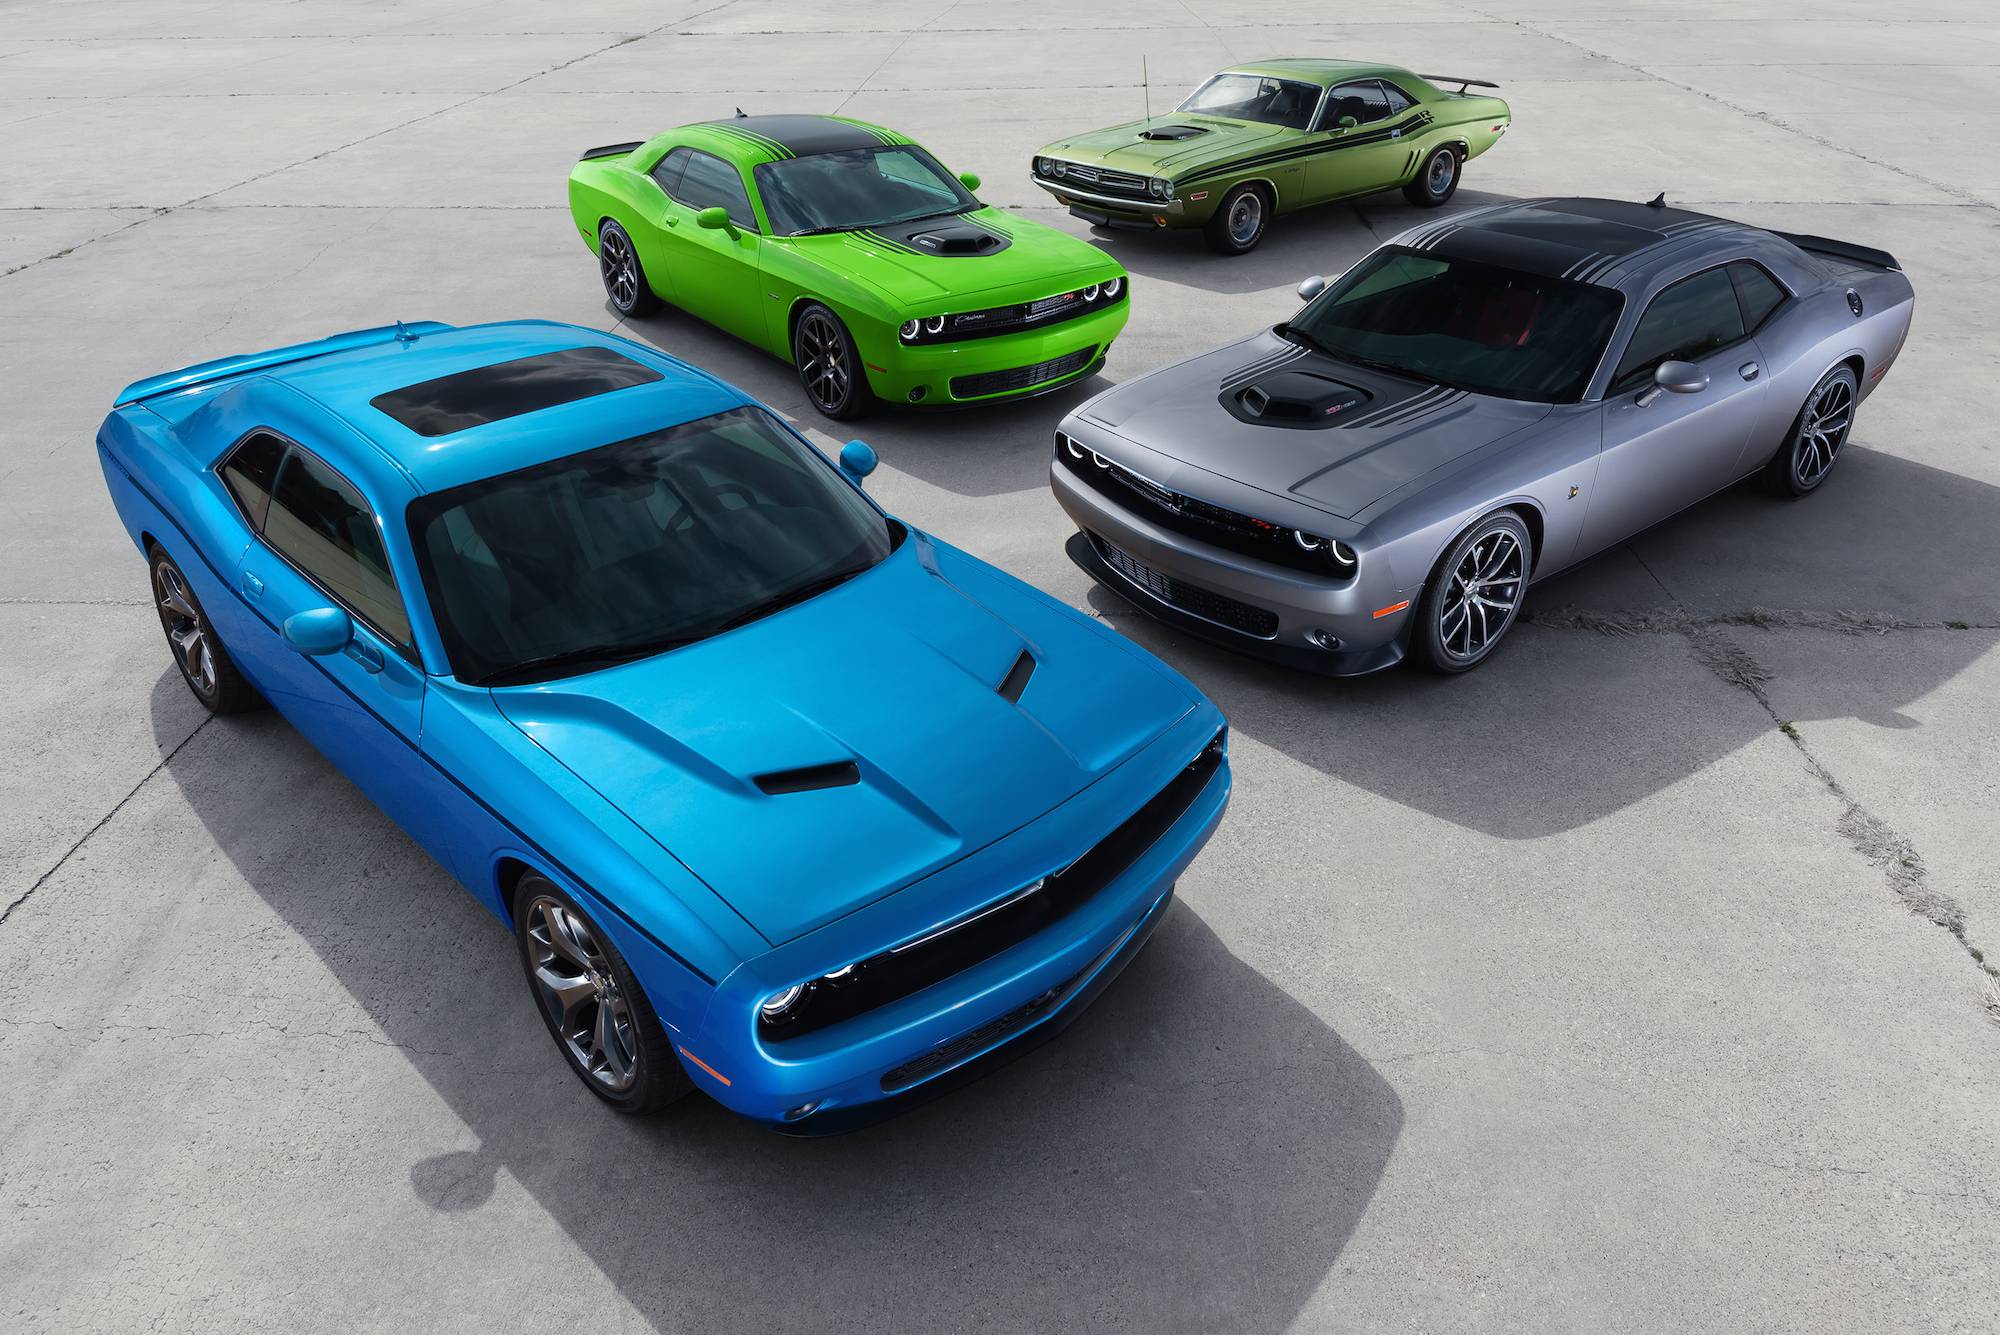 2018 Dodge Challenger Concept Hellcat Redesign | 2016 - 2020 All ...